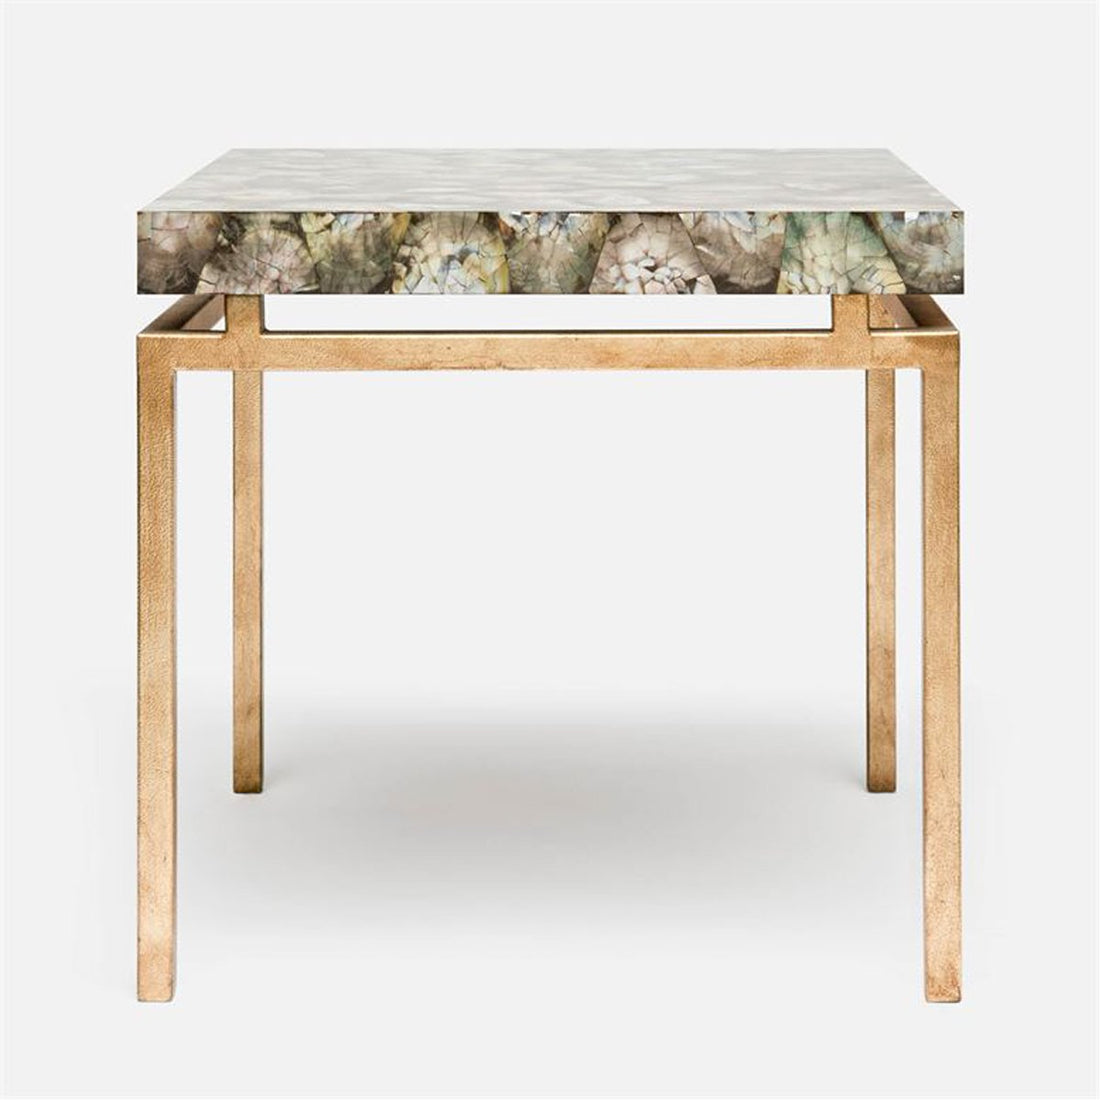 Made Goods Benjamin Floating Leg Side Table in Mop Shell